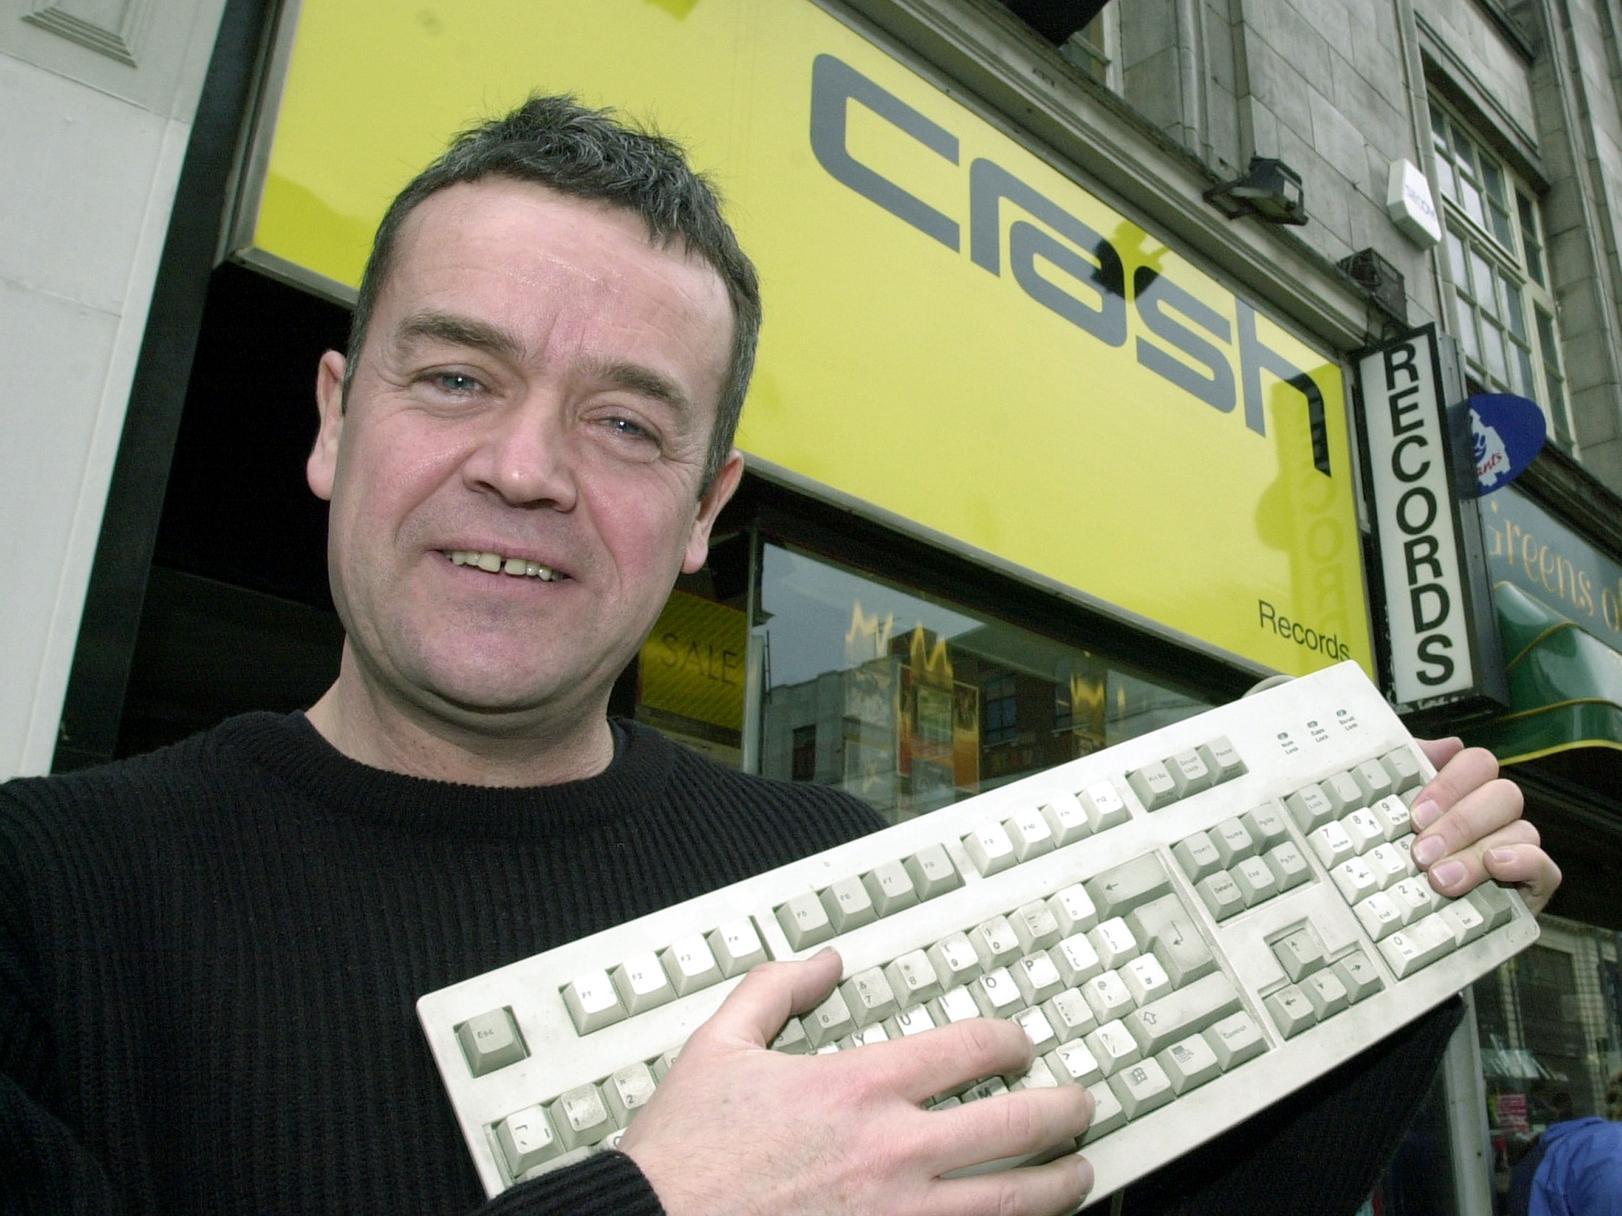 Ian De-Whytell, owner of Crash Records on The Headrow, launched a website for people to support a music arena in Leeds.